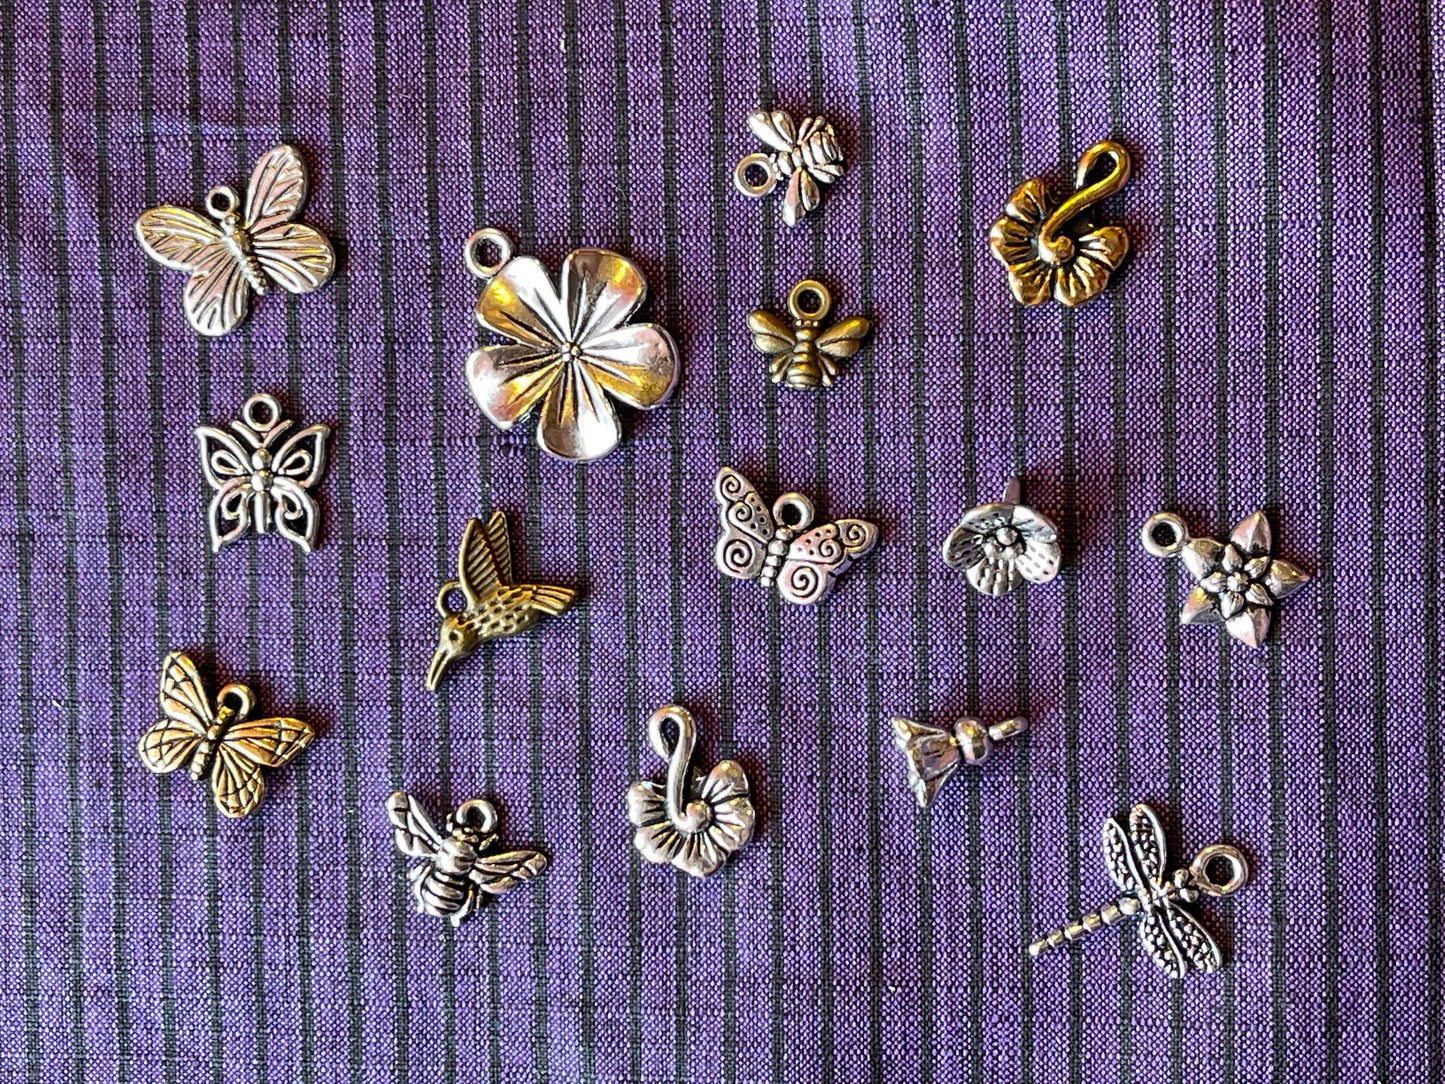 Bee, Butterfly & Blossom PREMIUM Assortment–Lot of 15 charms–gold and silver plated–flowers, hummingbird, dragonfly, bee (Tierracast garden)